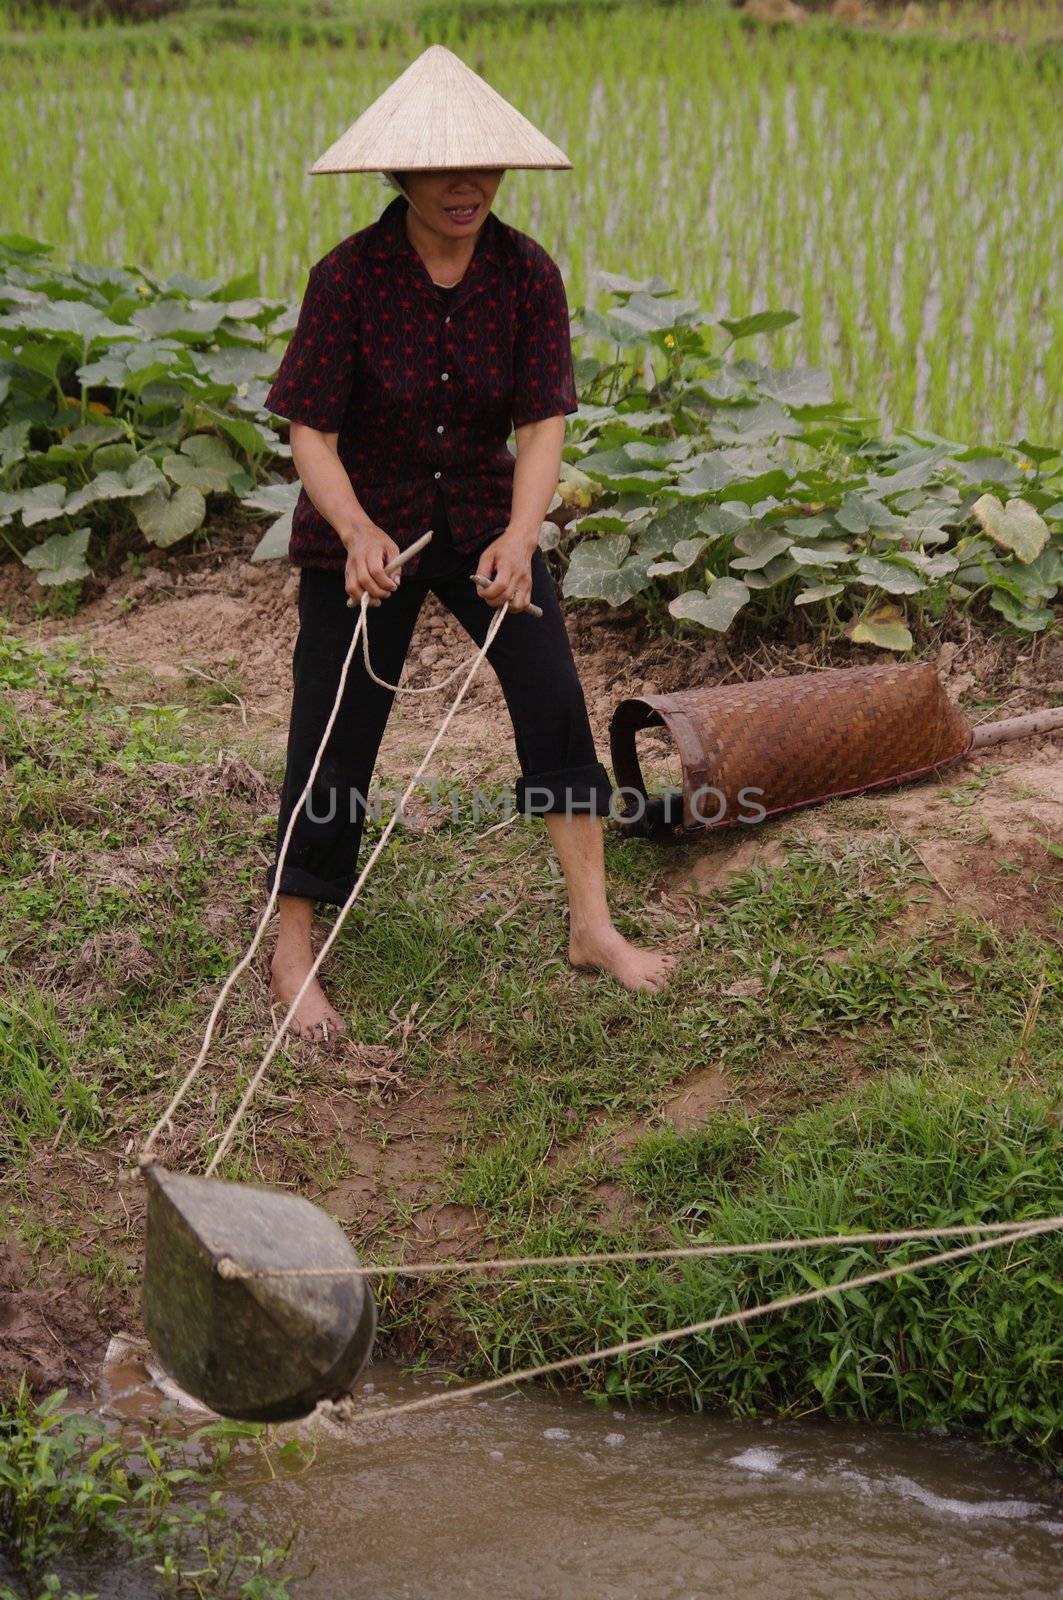 Irrigation Manual of ricefield